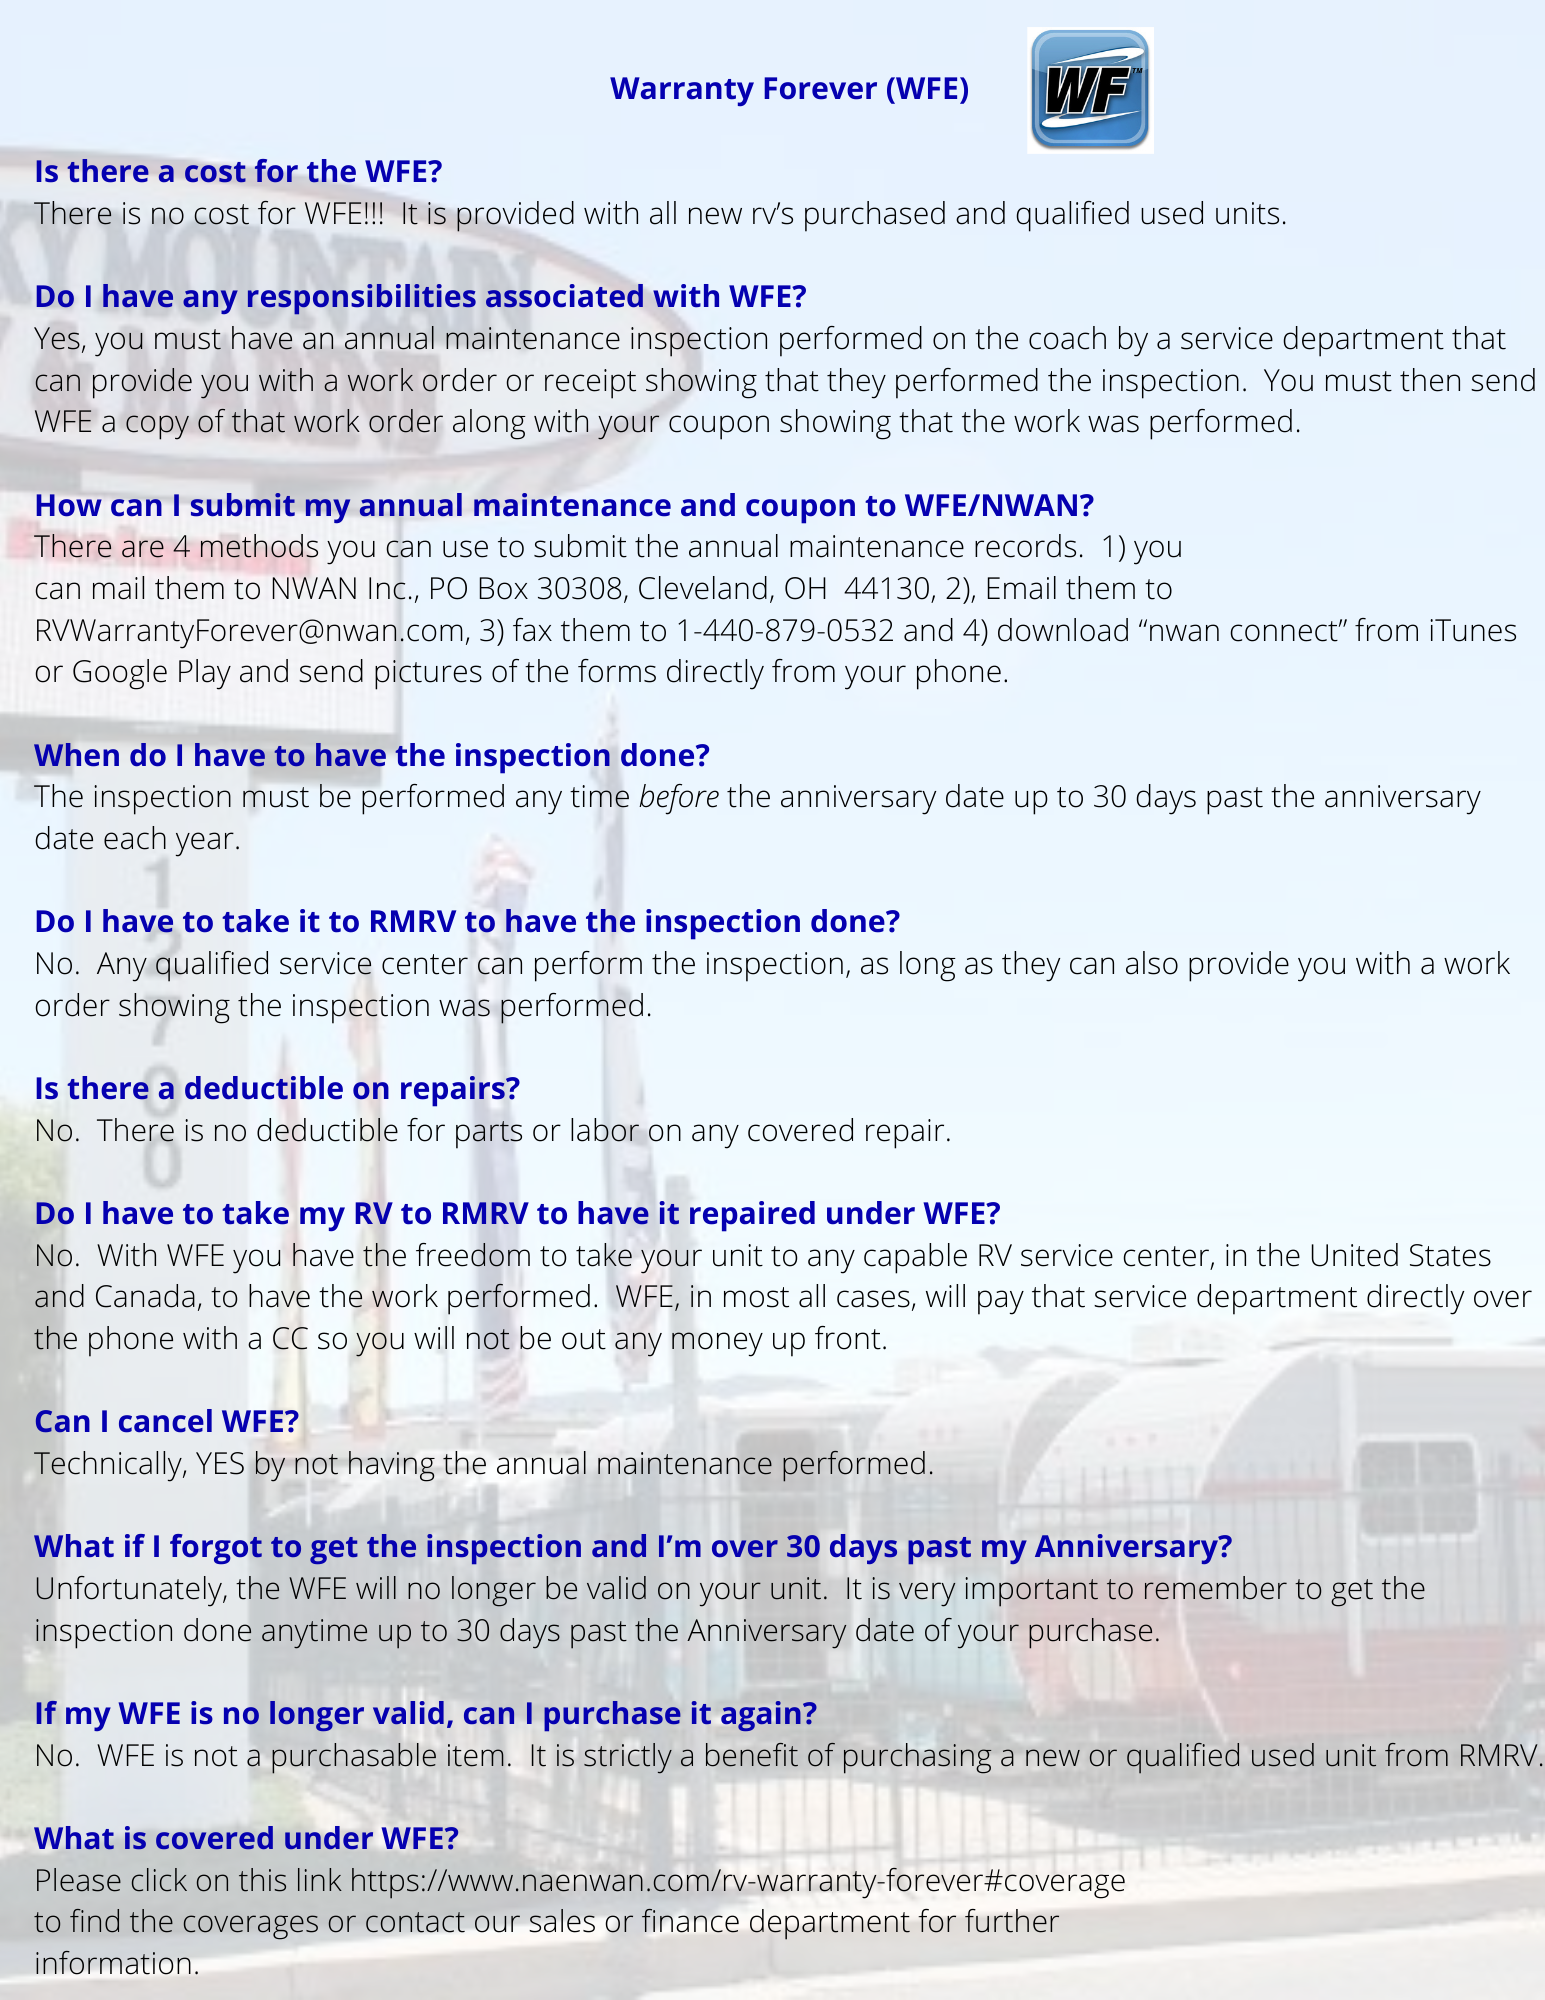 FAQ's About the RV Warranty Forever